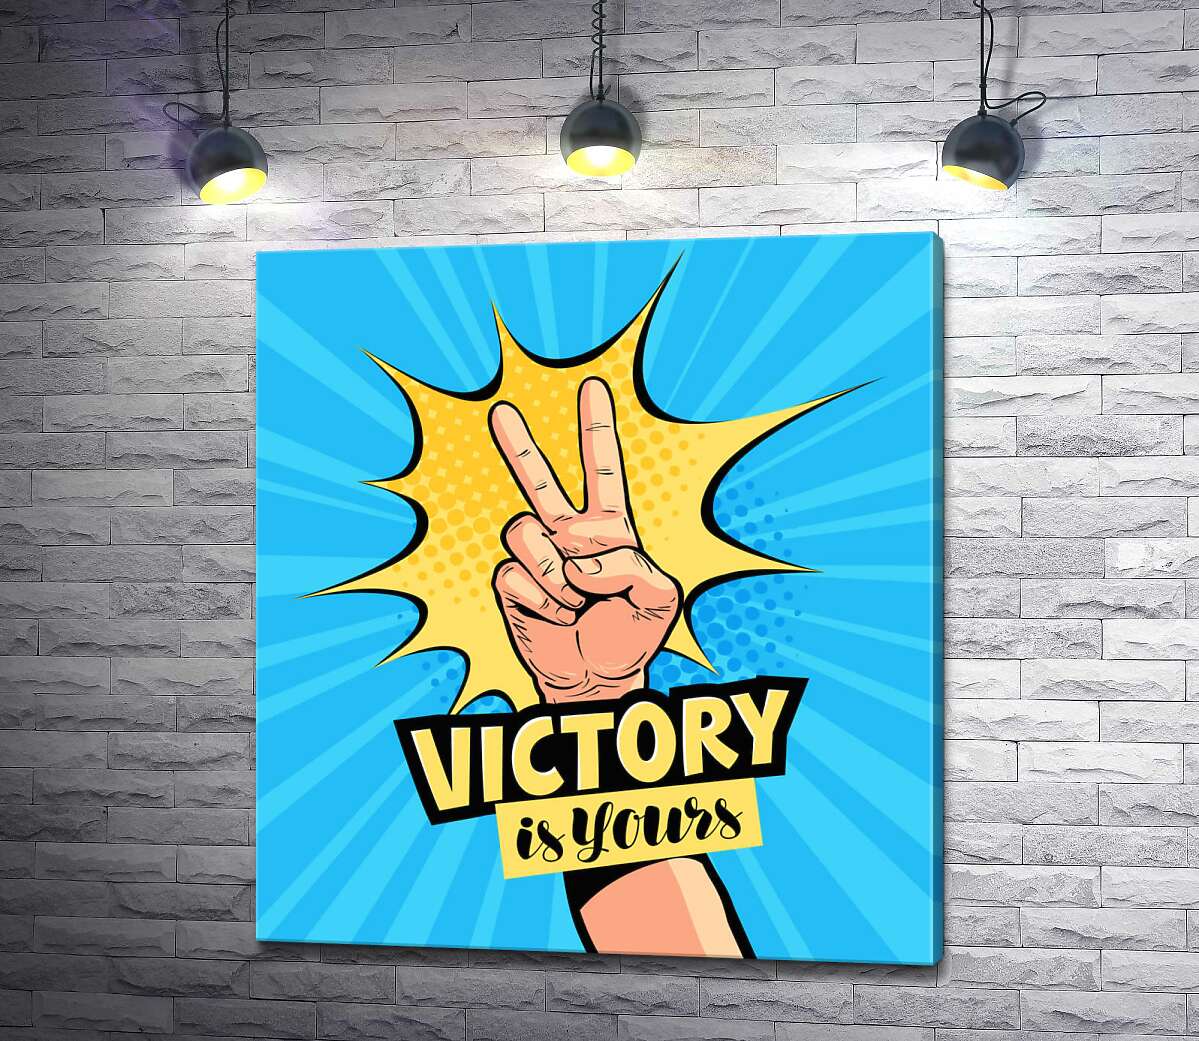 картина Символ победы дополняет фразу "victory is yours"